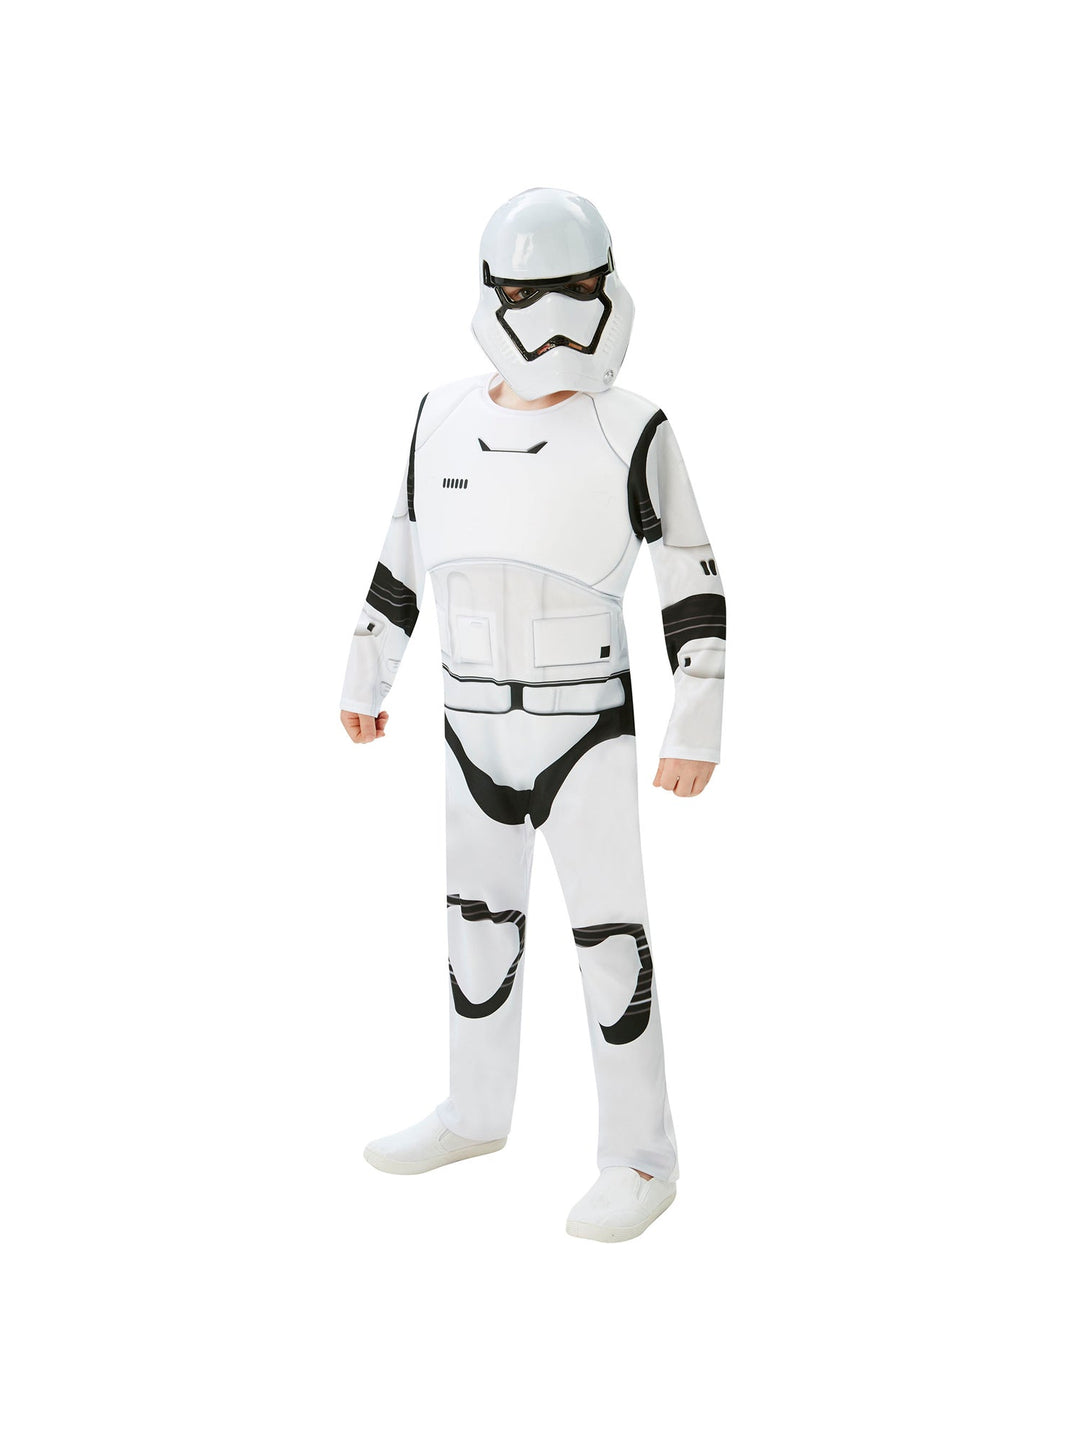 Star Wars Stormtrooper Costume For Teens The Force Awakens_2